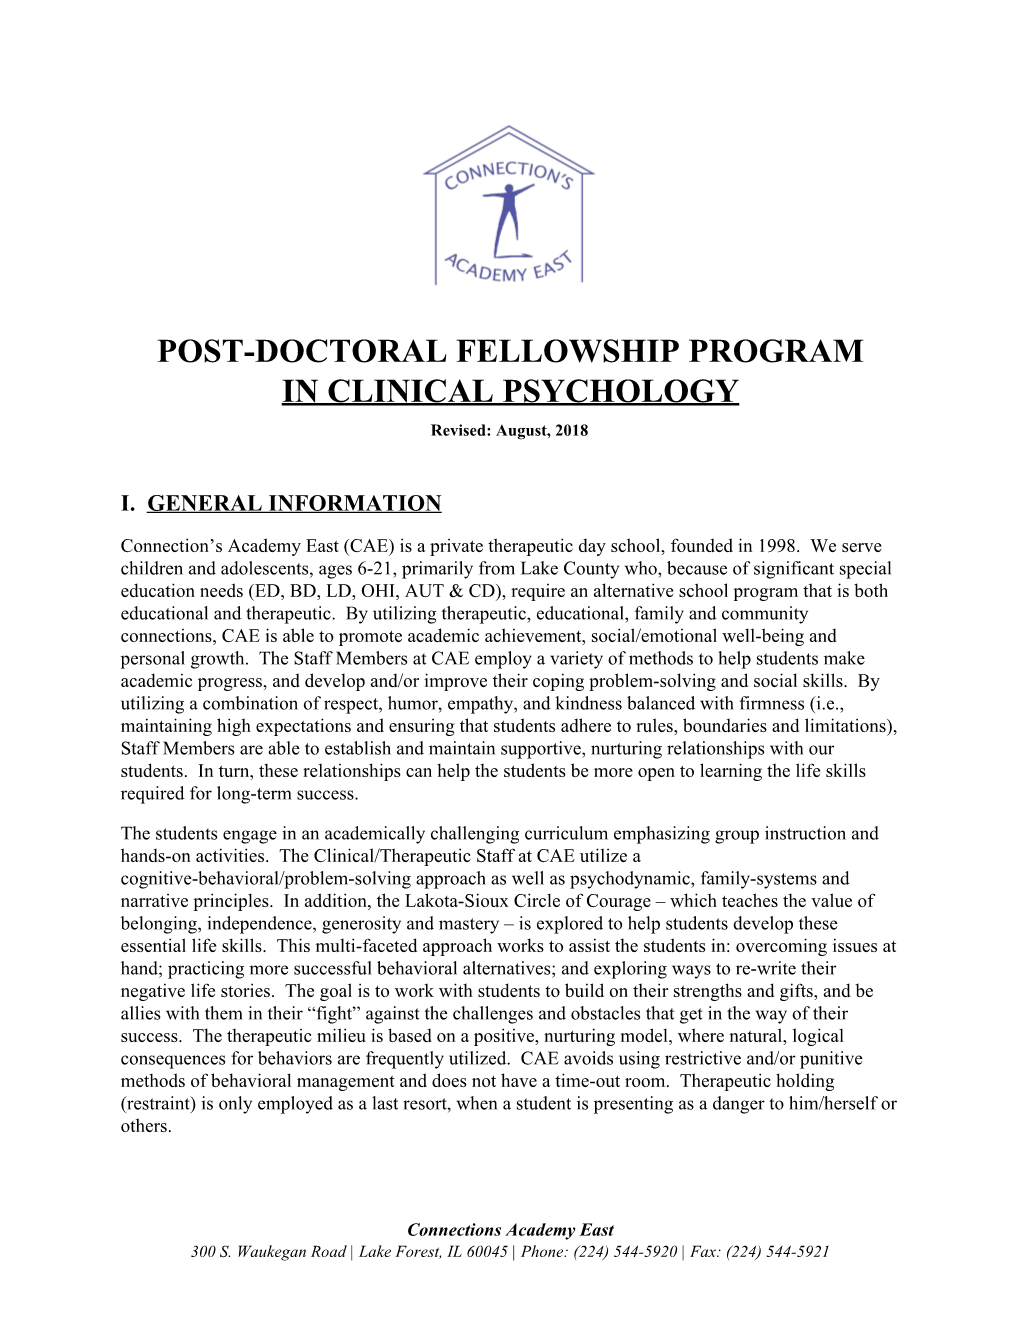 Post-Doctoral Fellowship Program in Clinical Psychology